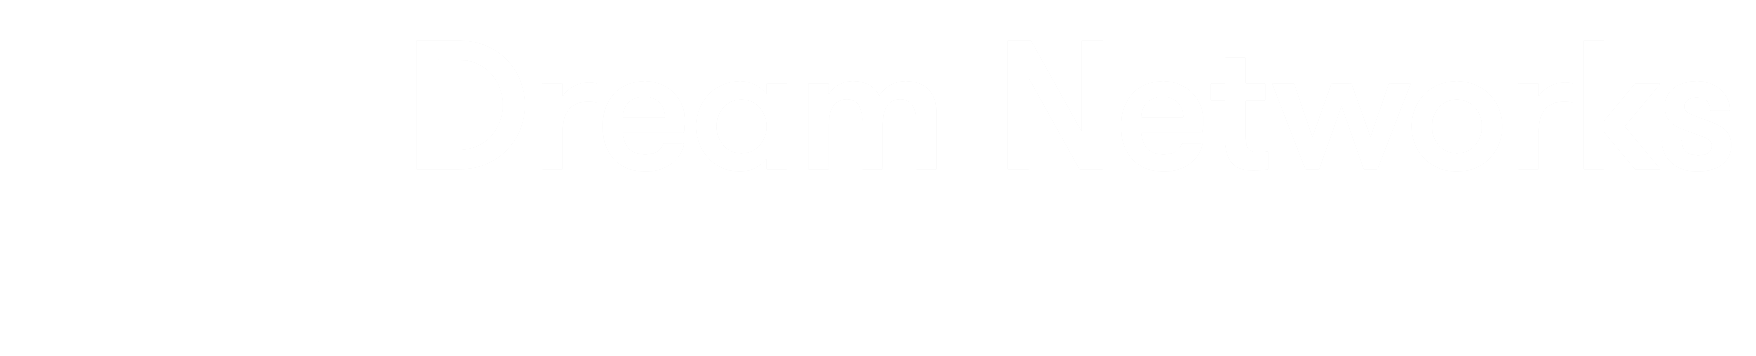 The dream networks love plays international logo in white